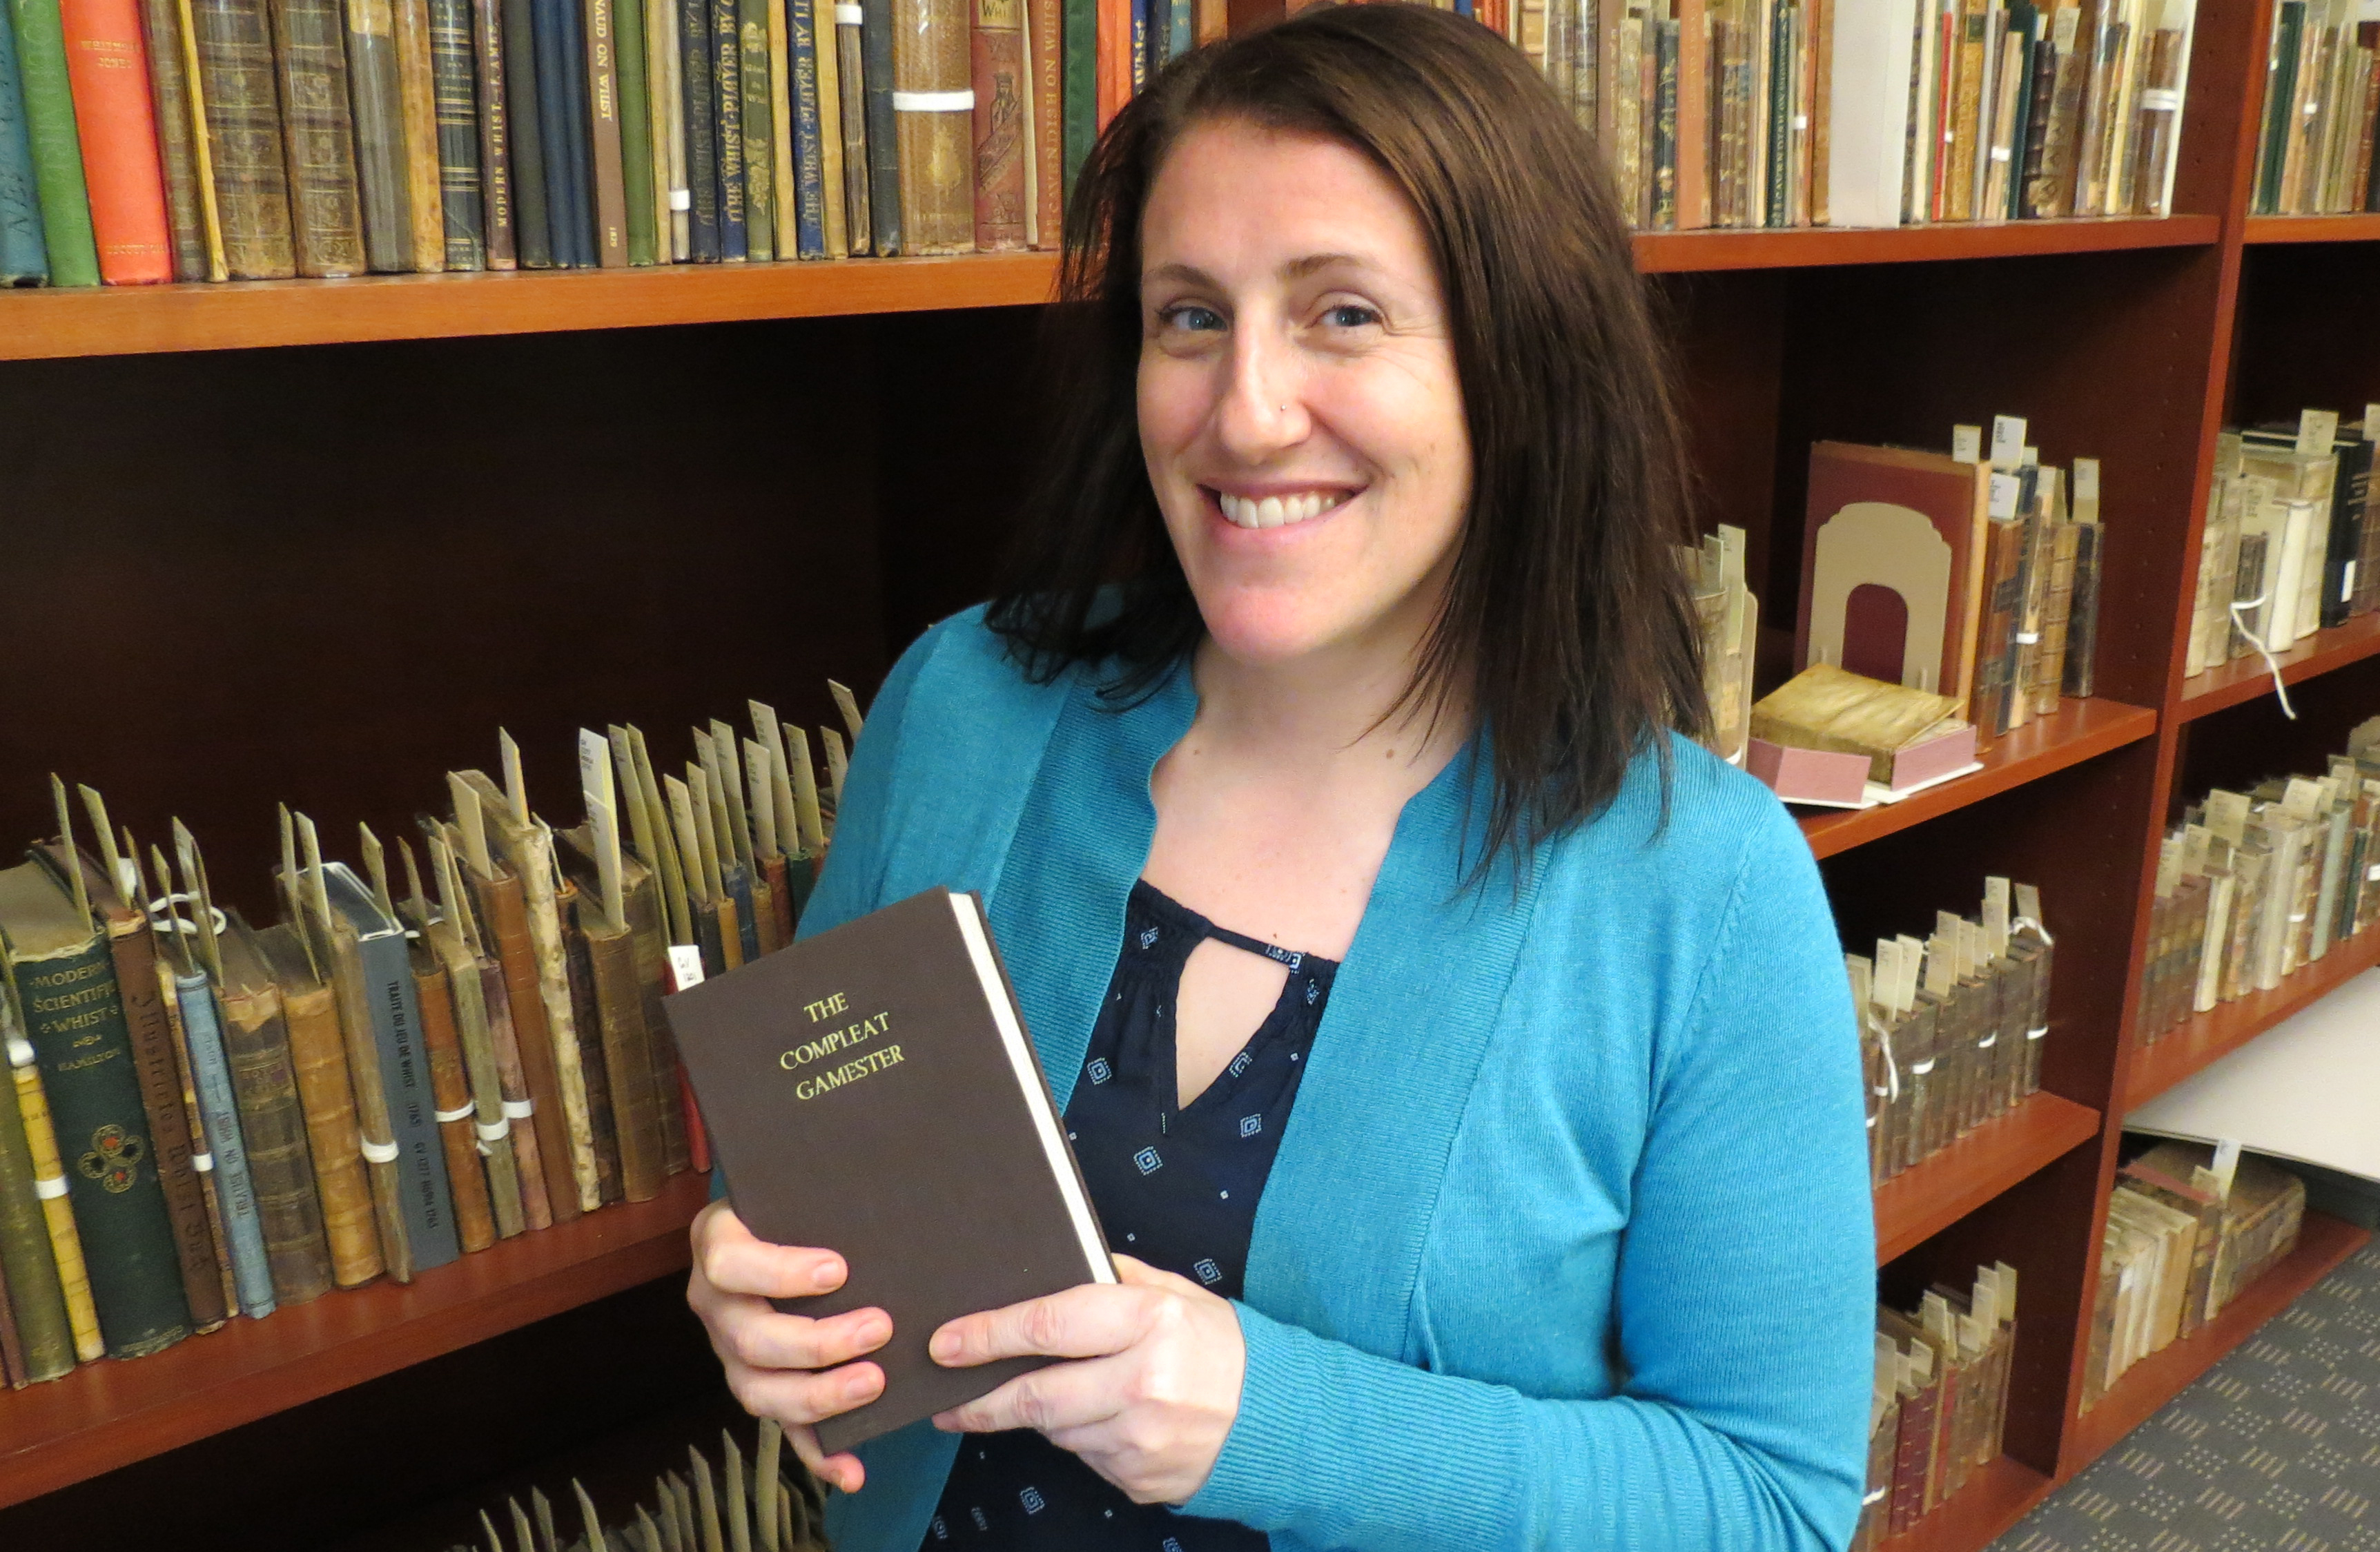 Dr. Celeste Chamberland holds a copy of The Compleat Gamster from the historical gaming collection in UNLV Special Collections.